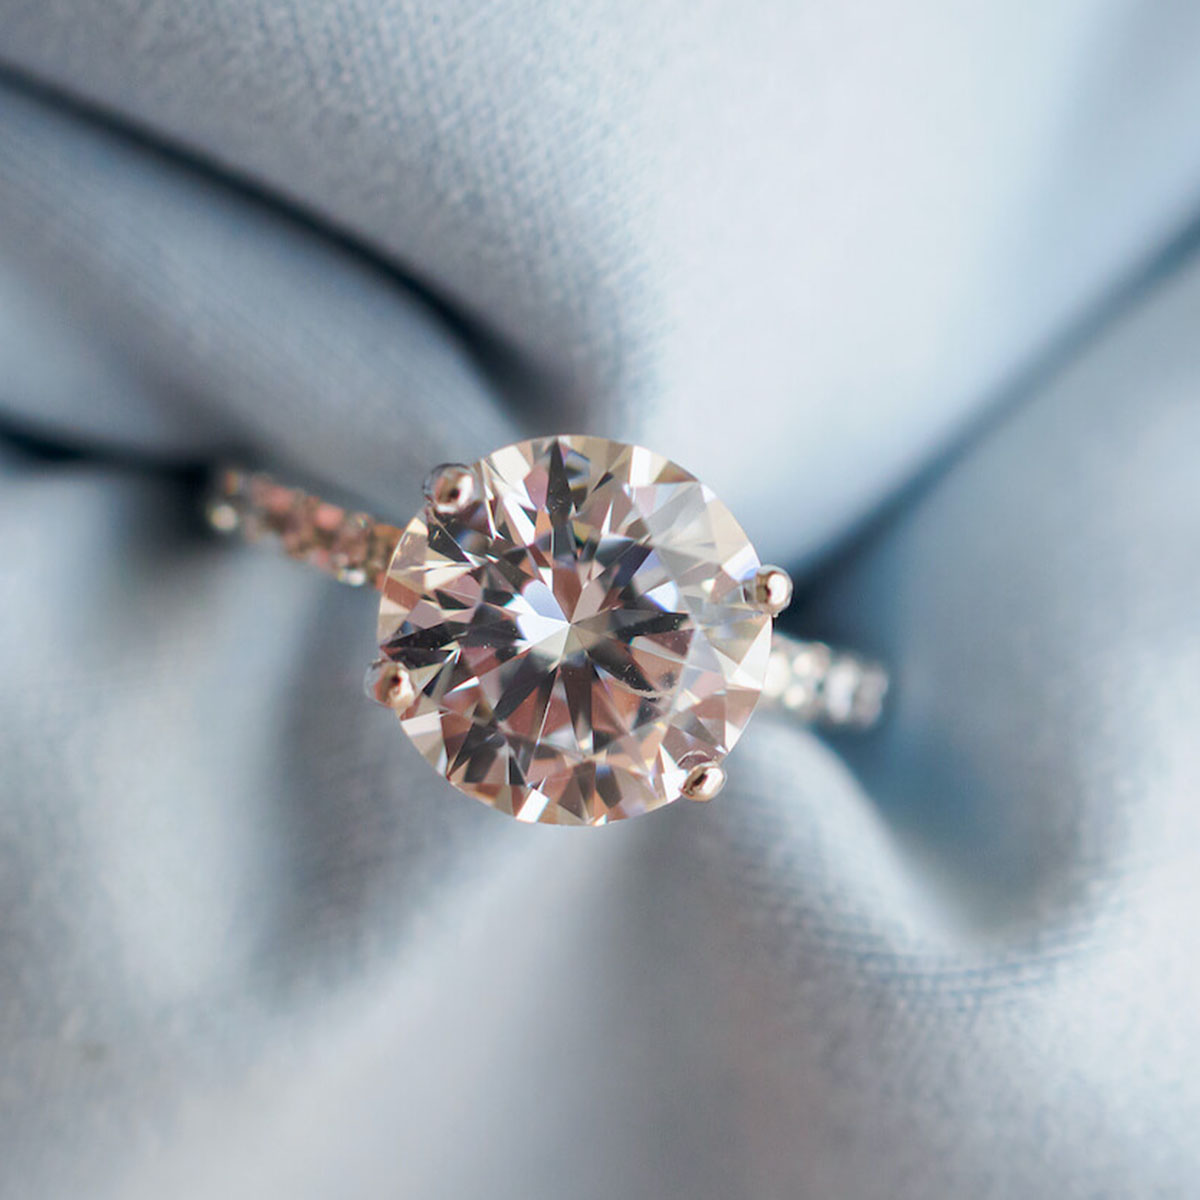 Where to Find the Perfect Bespoke Engagement Ring in London